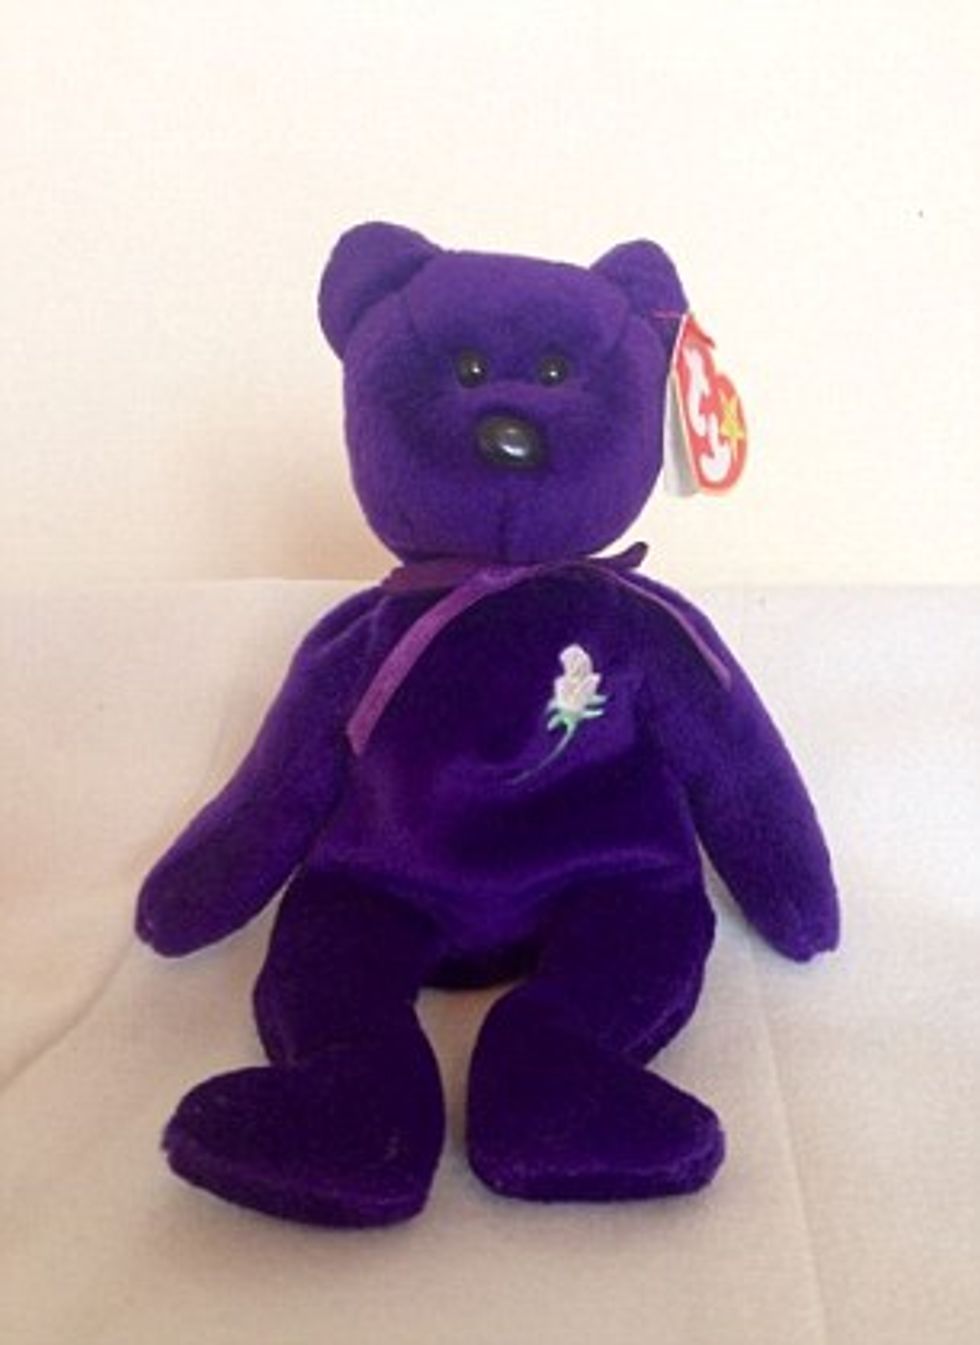 A British Couple Discovered an Old Beanie Baby at a Flea Market. They Paid $15 for It — Wait Until You Read What It's Really Worth. (UPDATE)